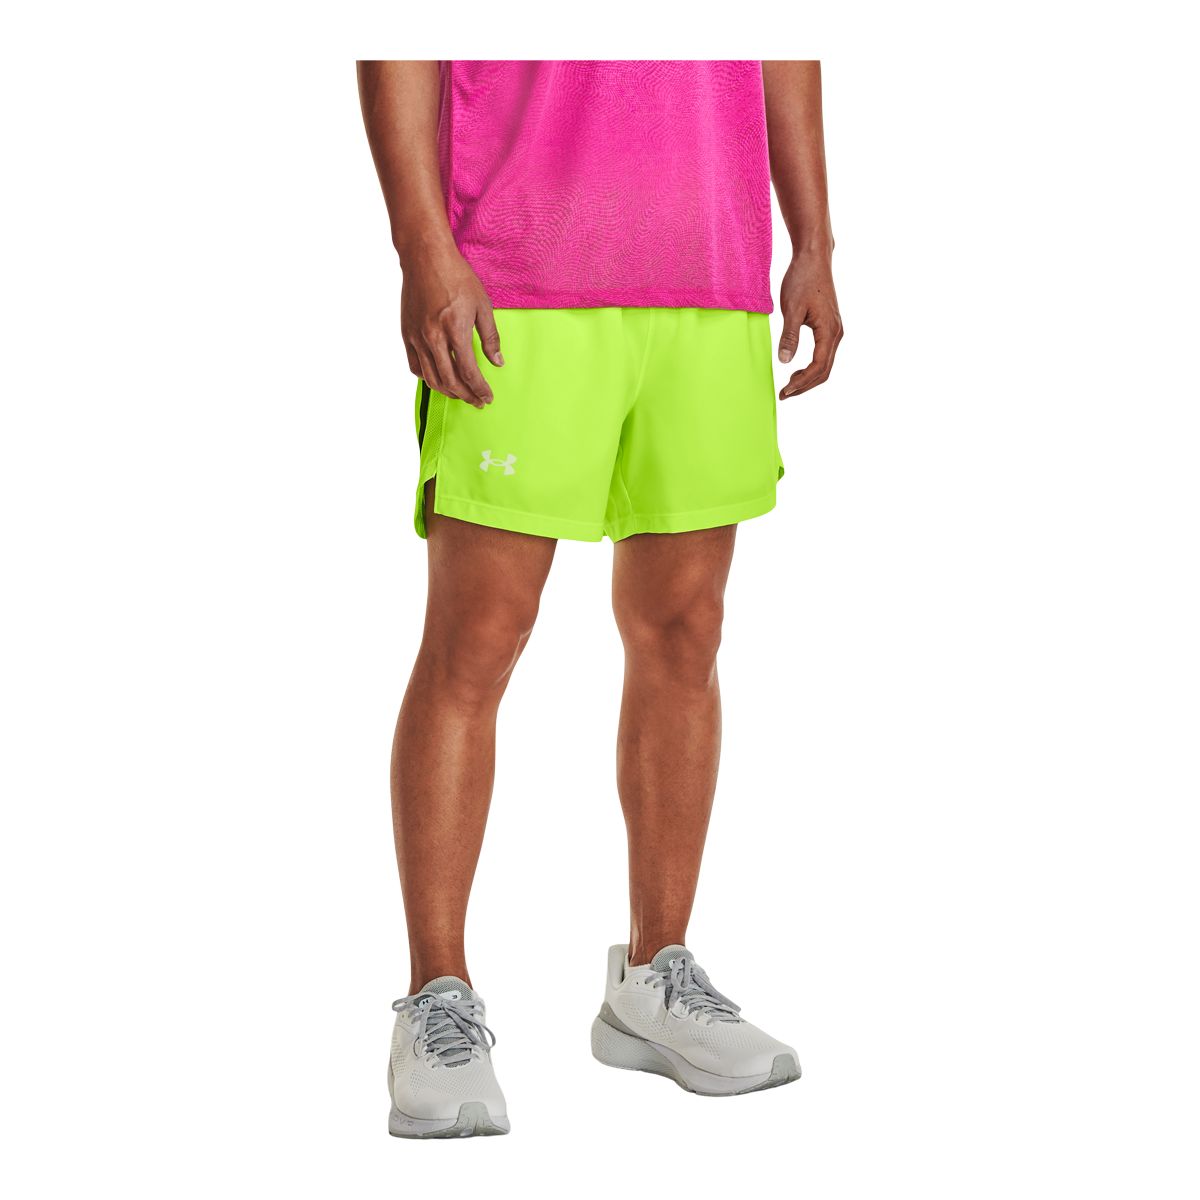 Under Armour Men's Baseline 10-in Shorts